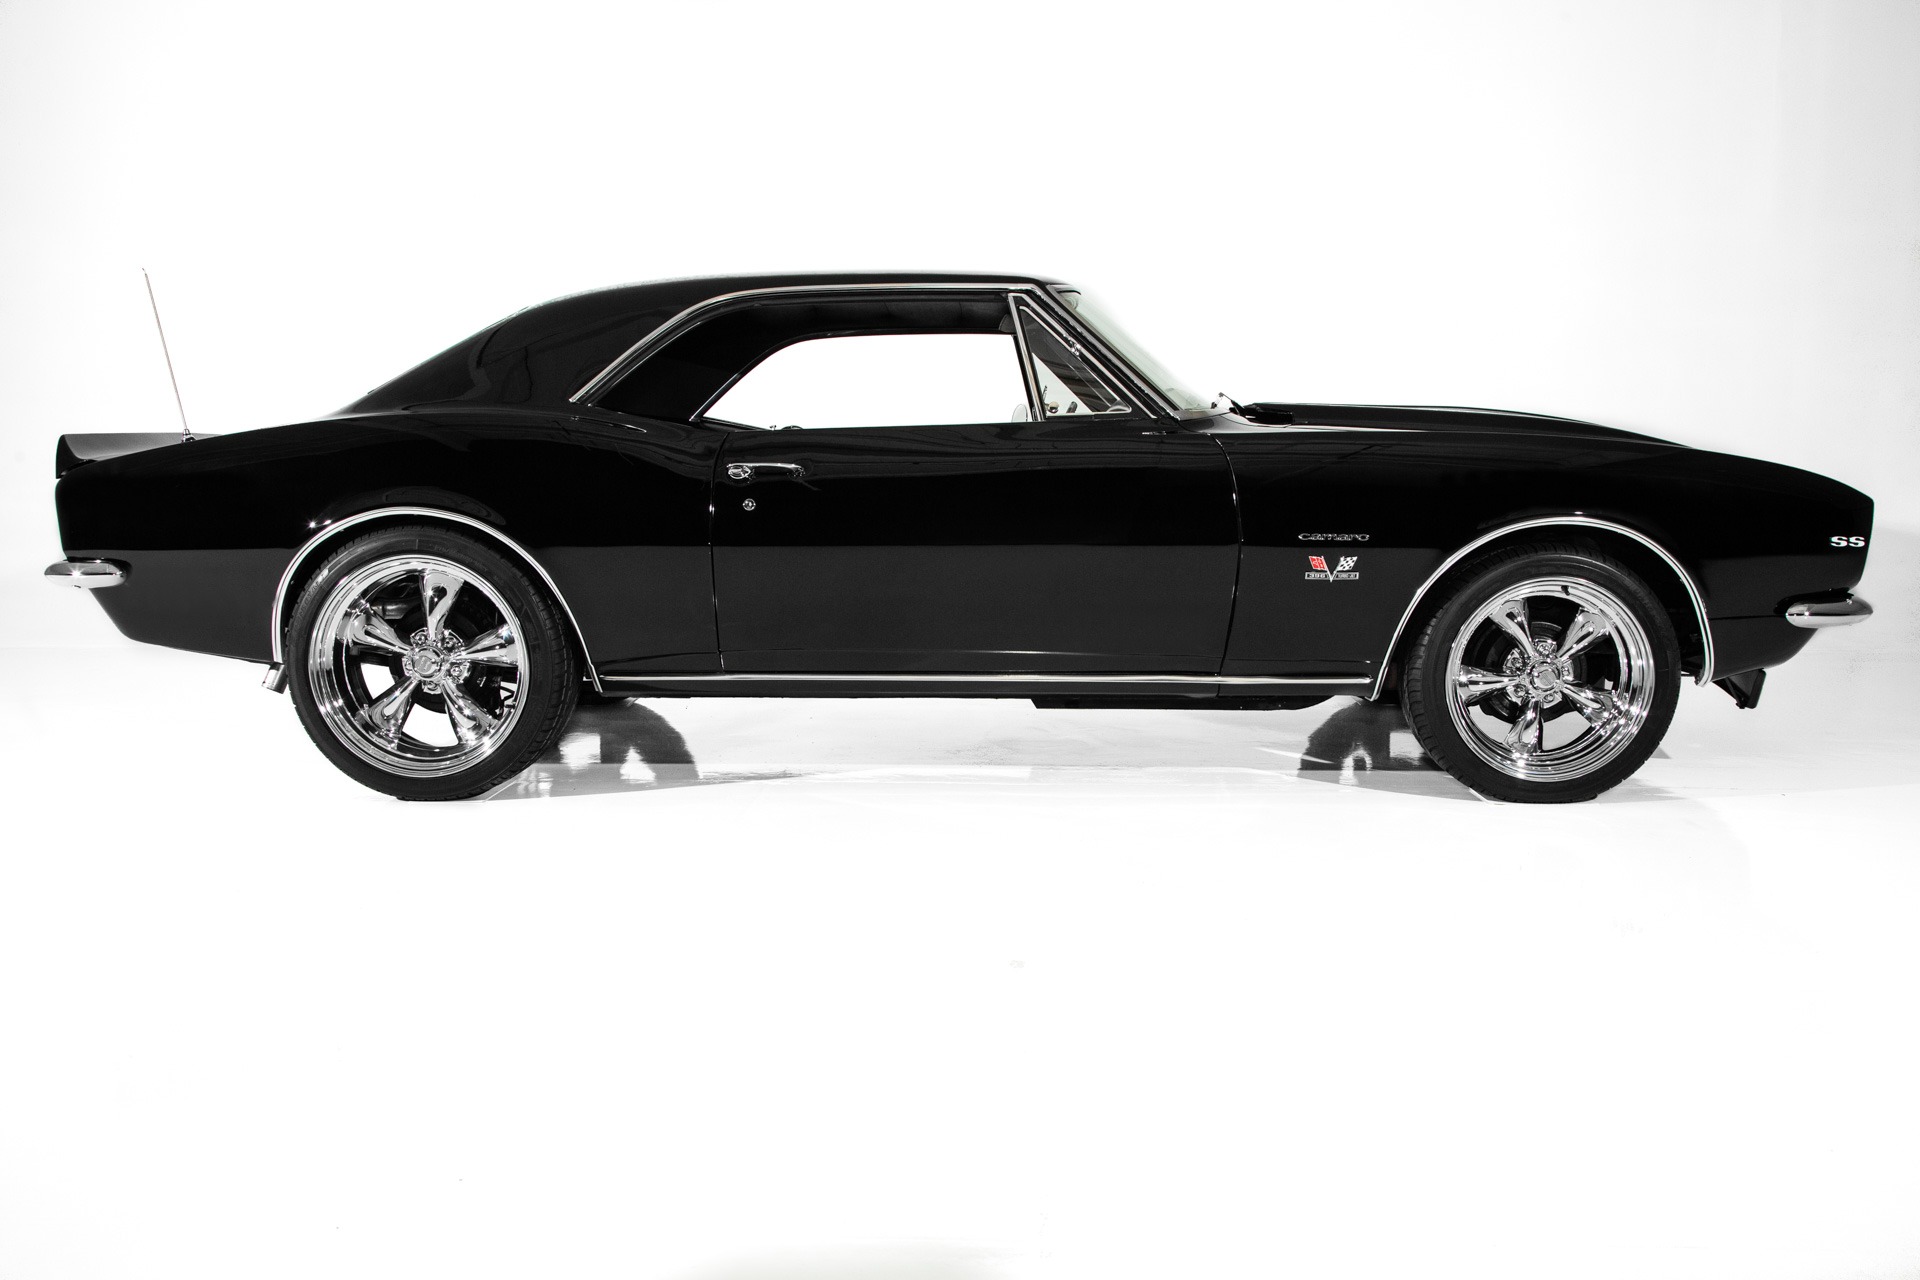 For Sale Used 1967 Chevrolet Camaro 4N SS 396, 4-Speed 12 Bolt | American Dream Machines Des Moines IA 50309